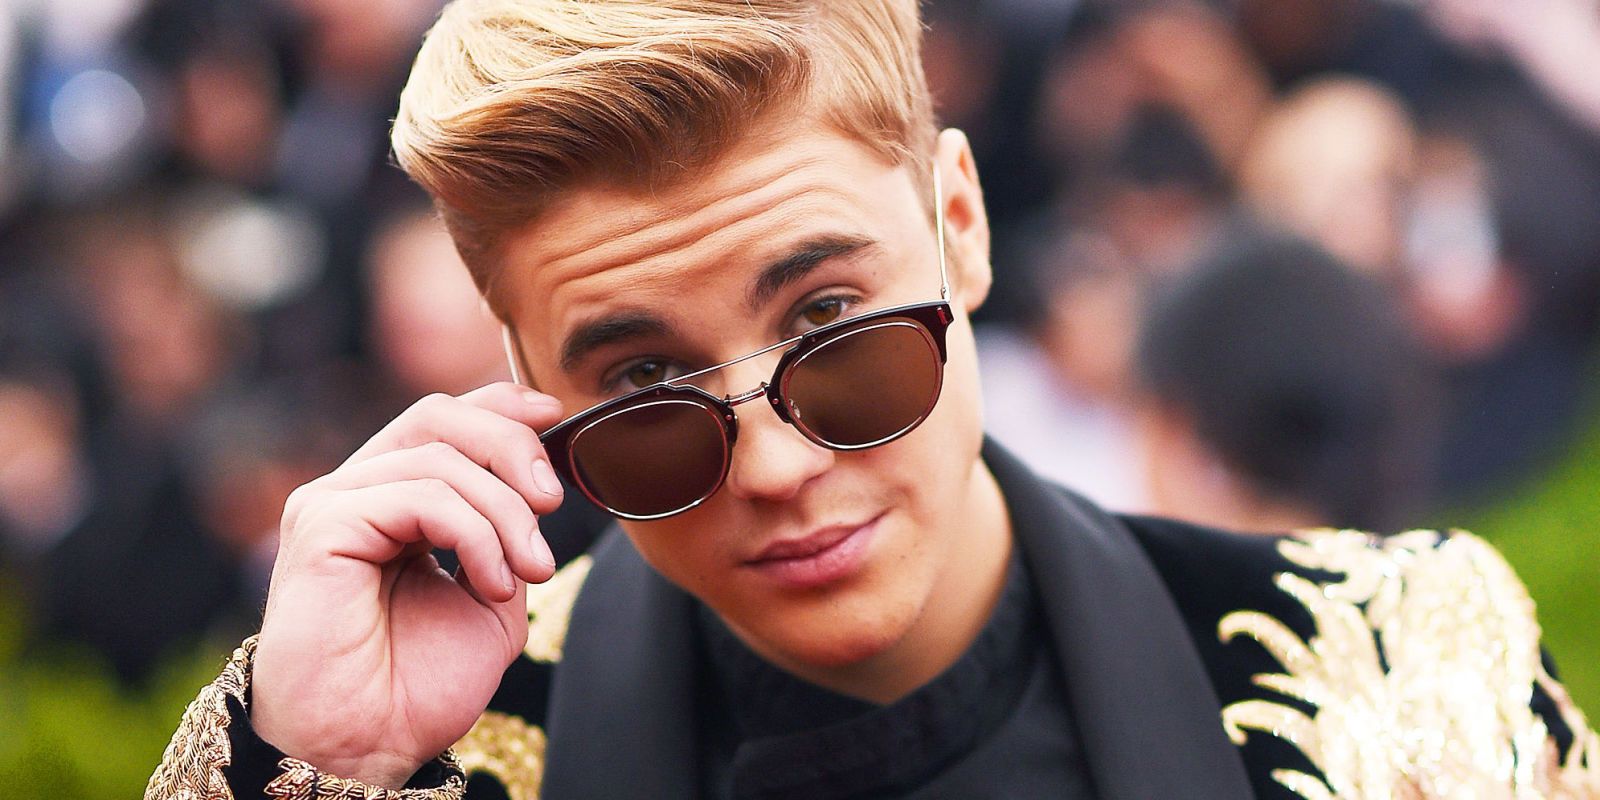 Justin Bieber has cancelled the remainder of his Purpose world tour   SHEmazing